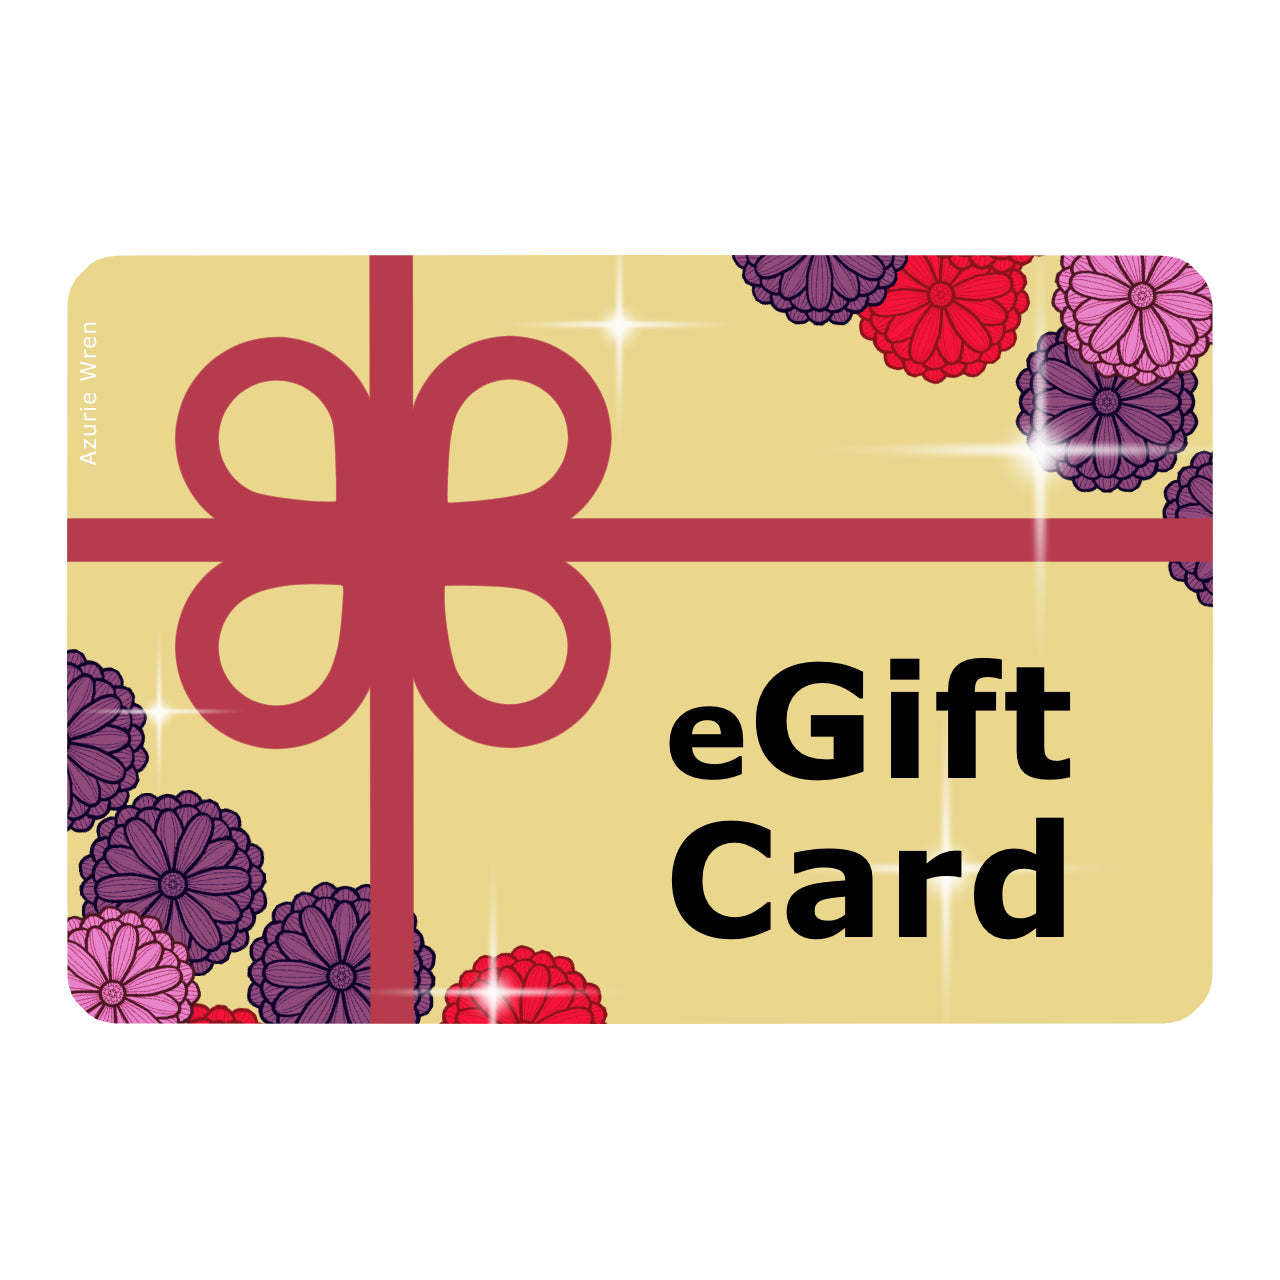 Gift card from Azurie Wren